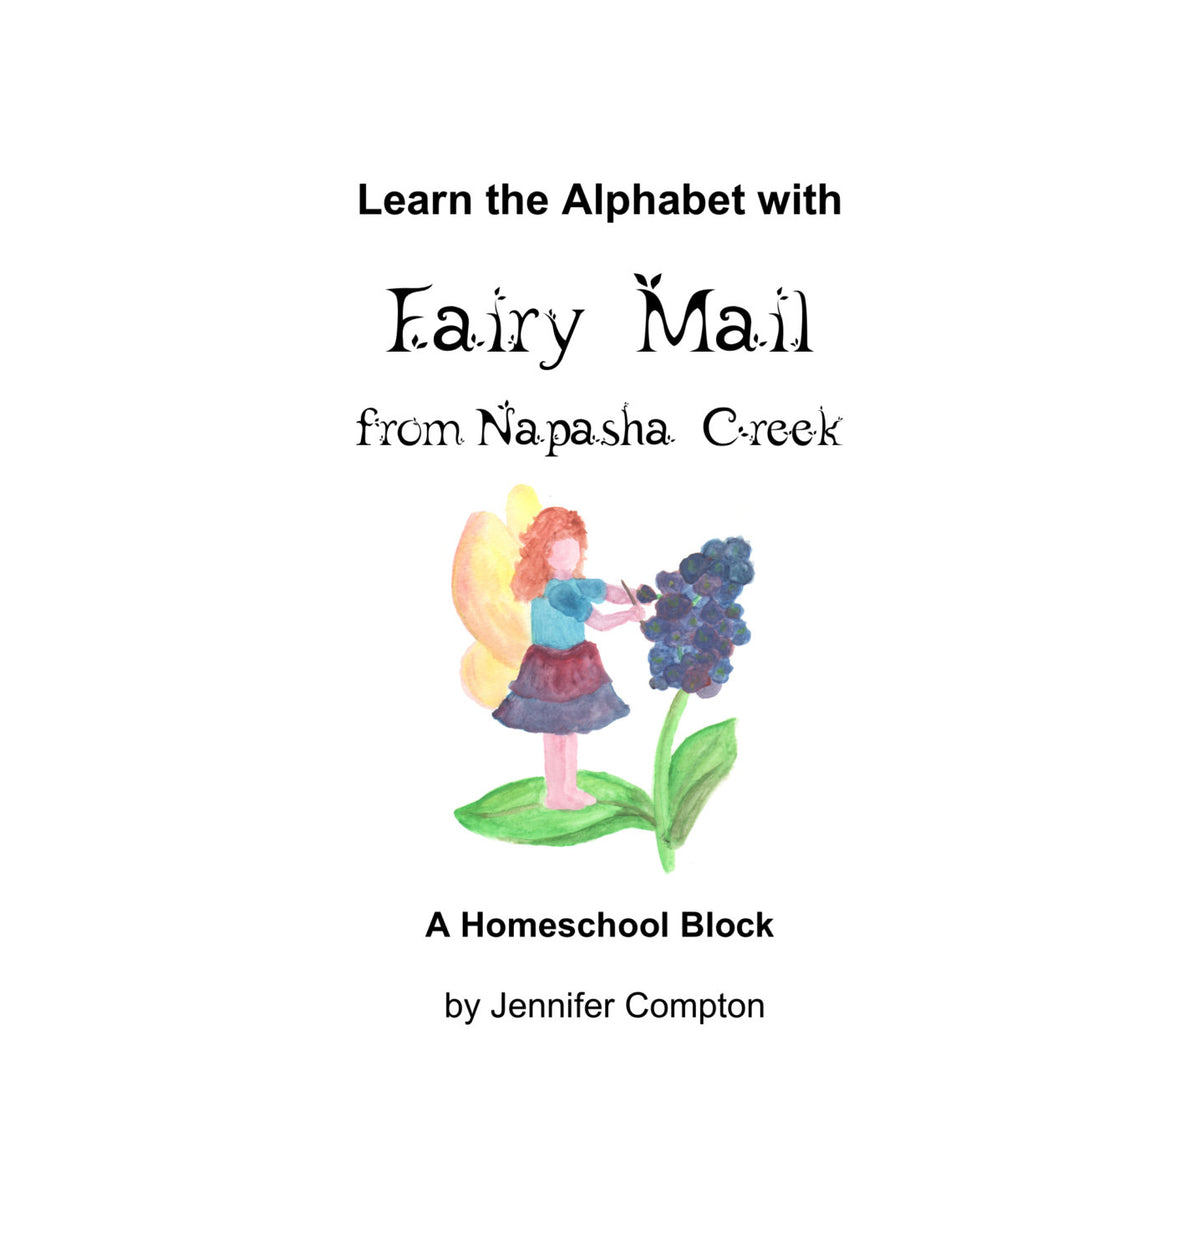 PDF: "Learn the Alphabet with Fairy Mail" for K-3rd